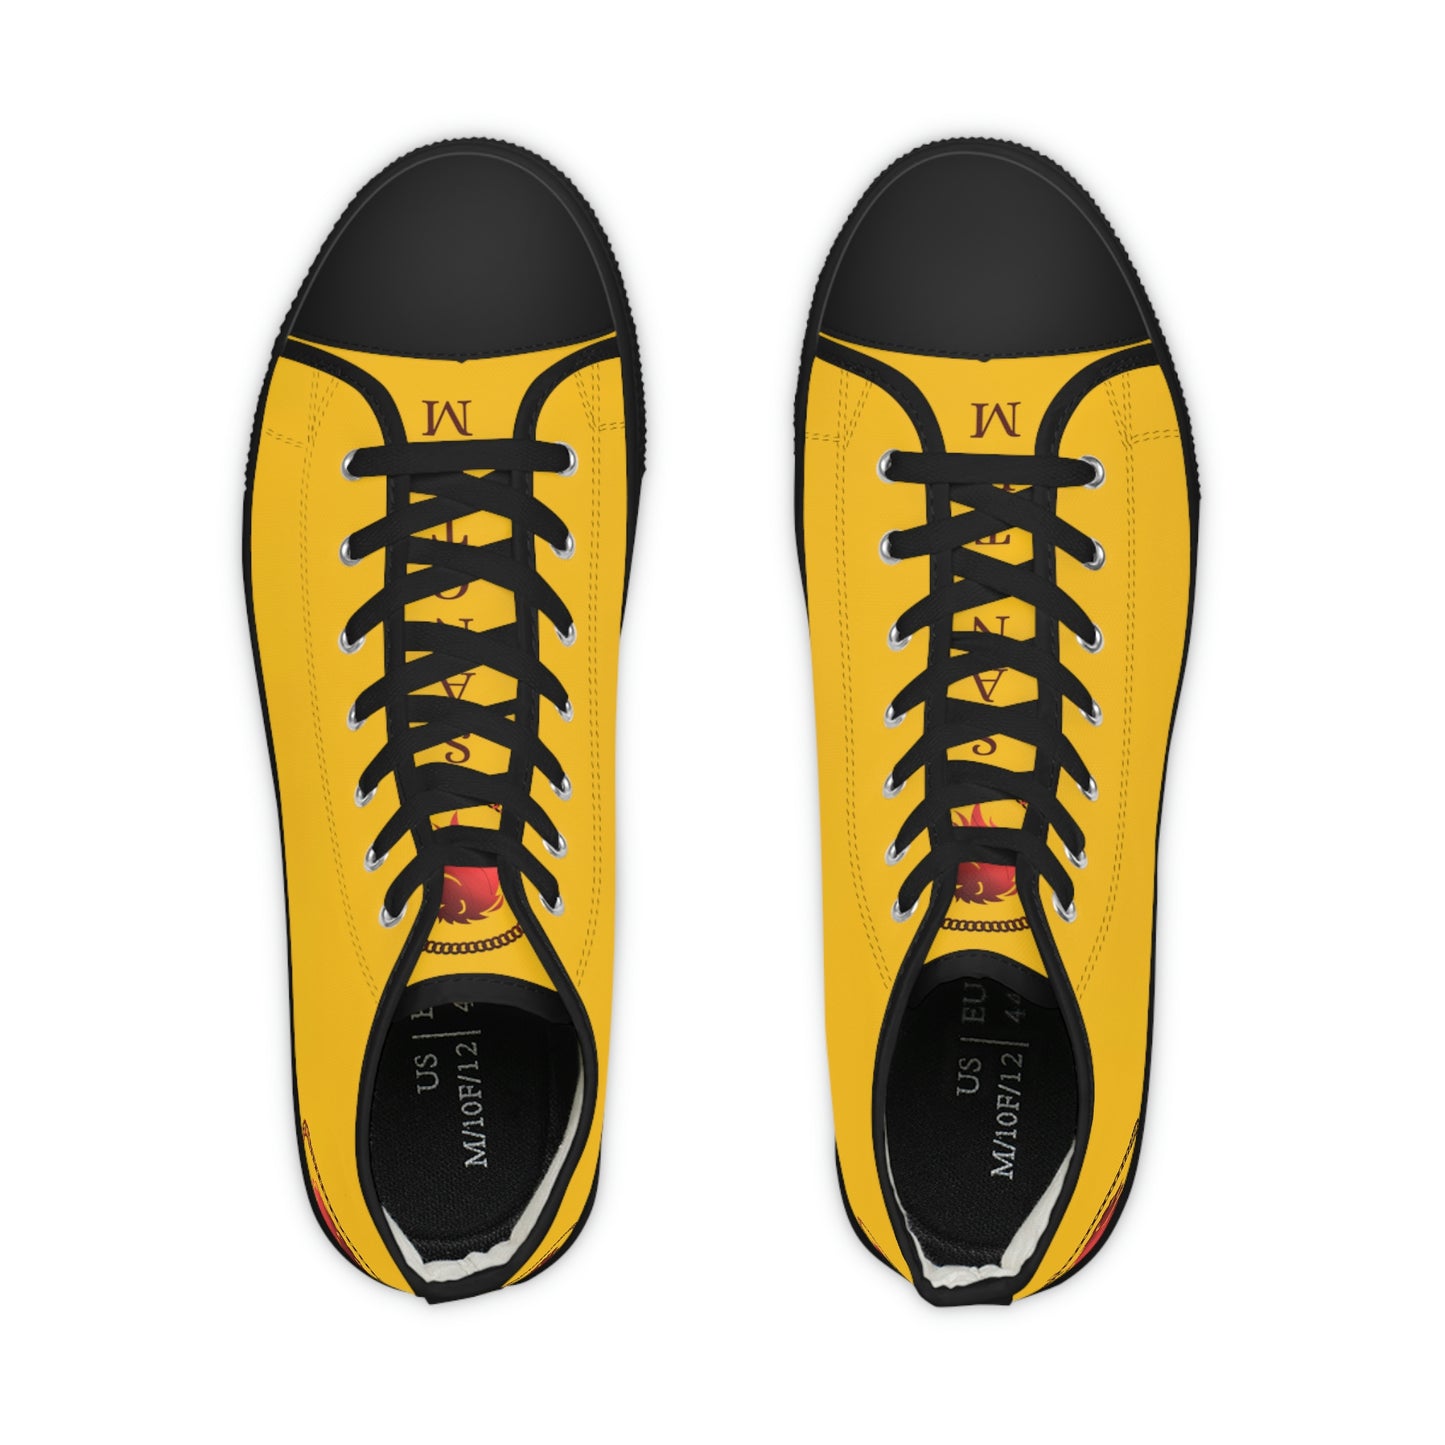 Red on Yellow, High Top Sneakers